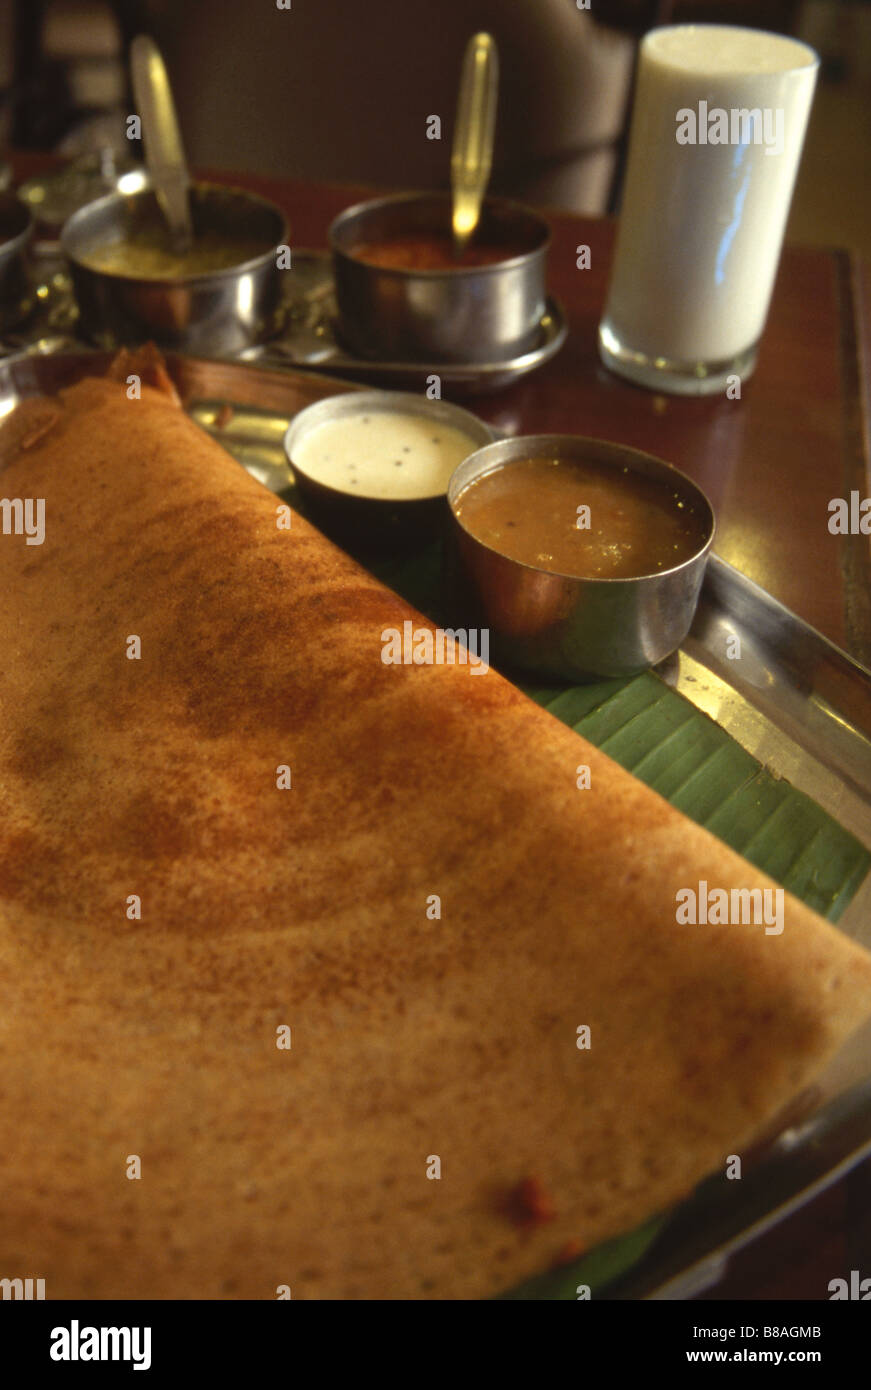 Dosa South Indian speciality a thin crispy crepe filled with vegetable curry served with sambal and chutney Stock Photo